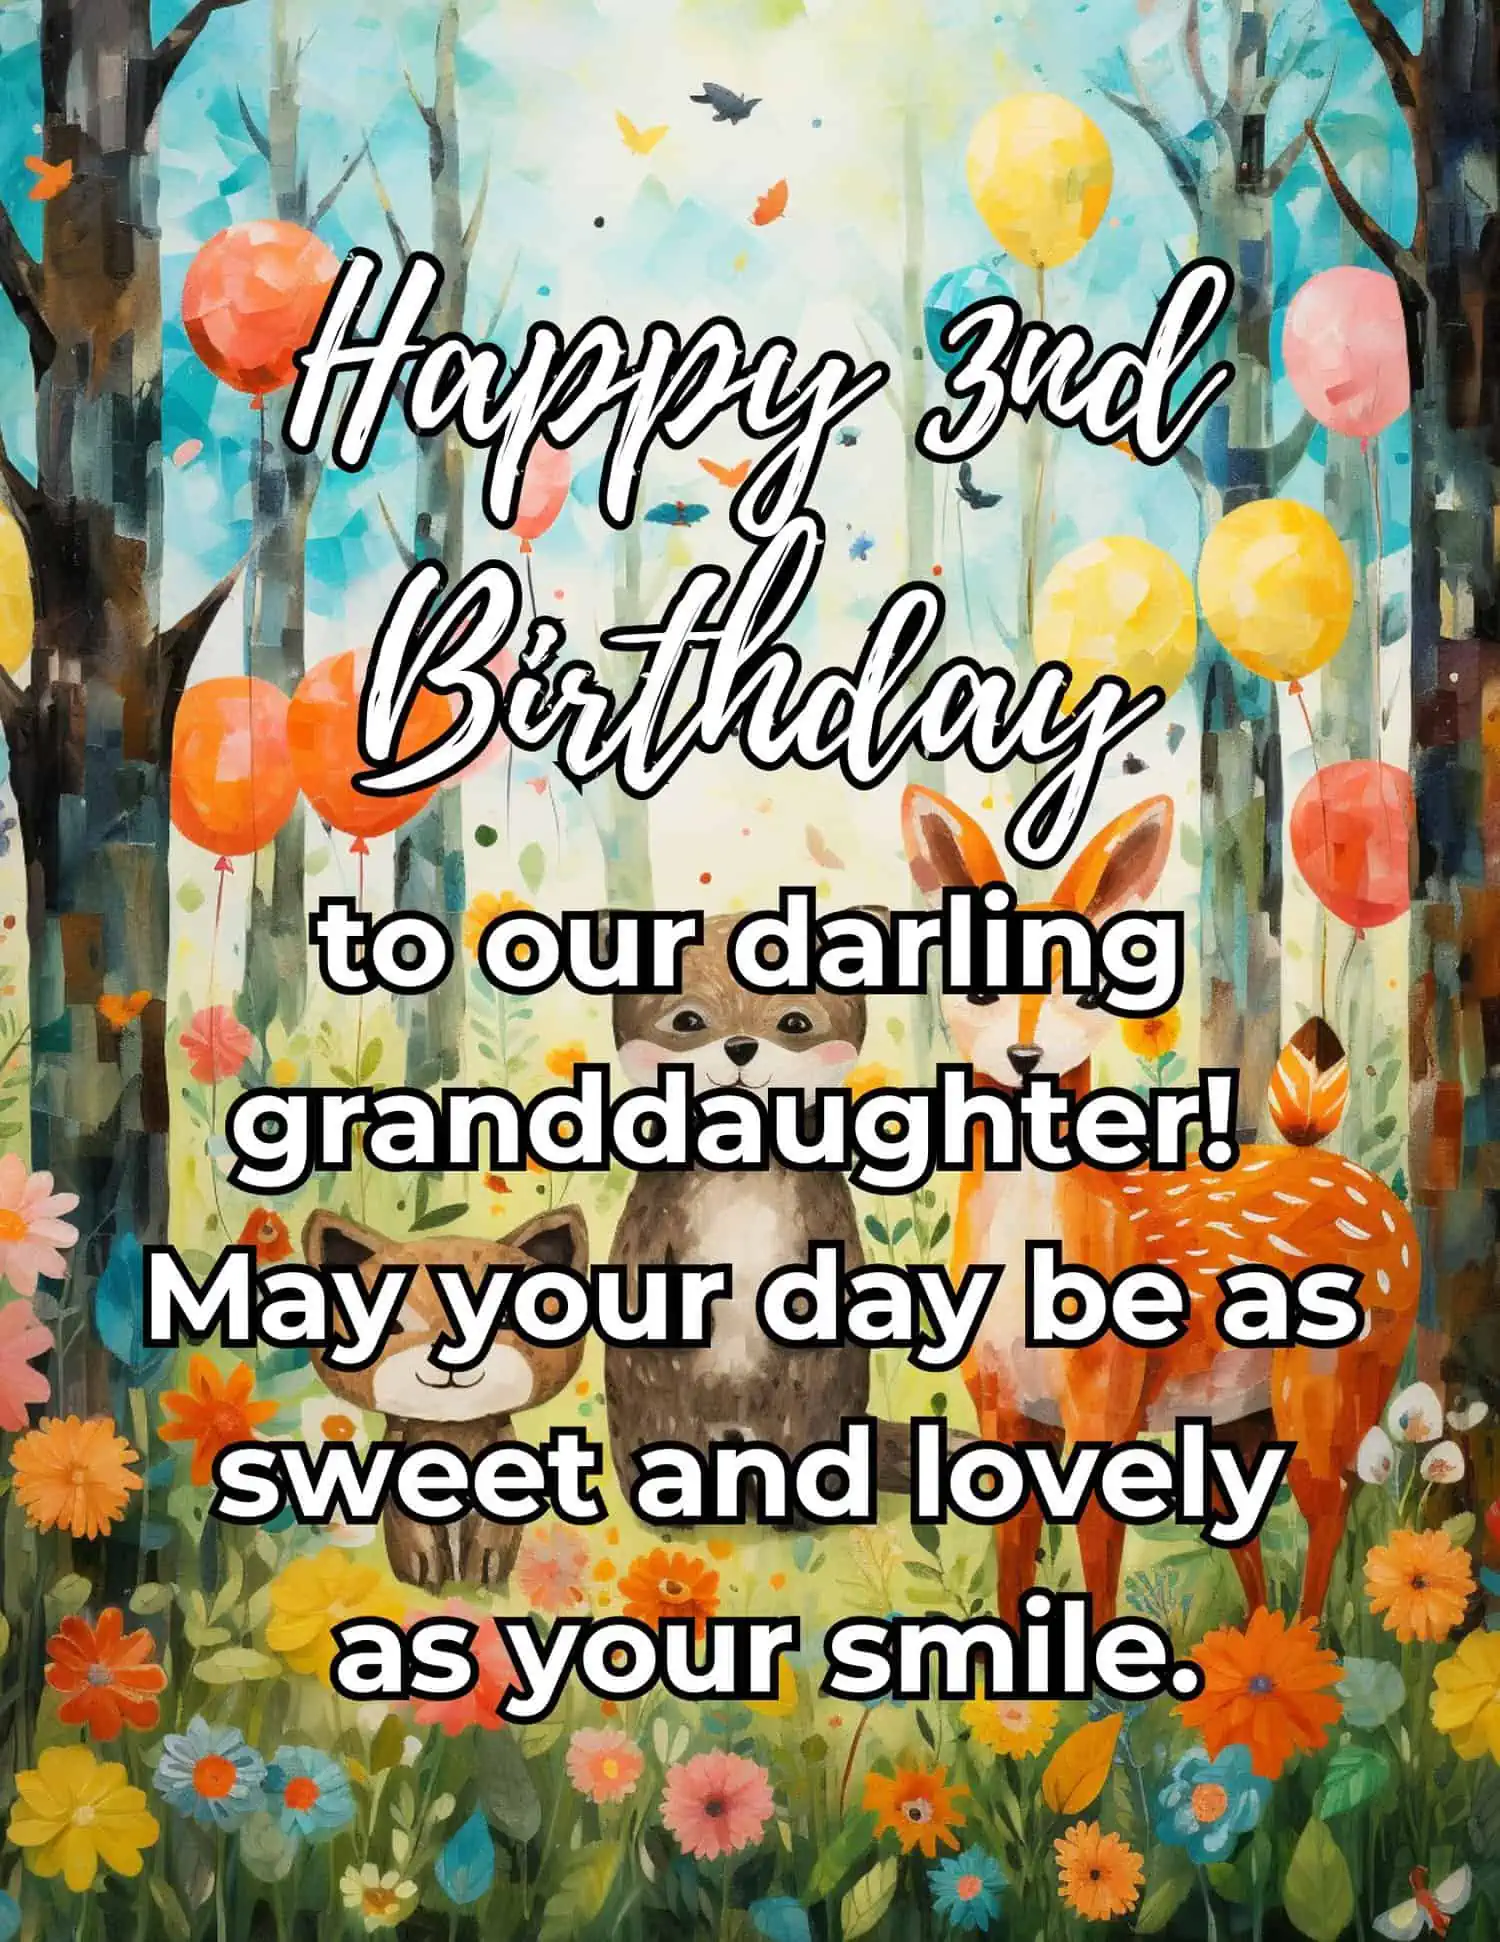 A heartfelt collection of birthday wishes tailored for a granddaughter's third birthday, encapsulating the wonder, love, and the unique bond between grandparents and their granddaughter.